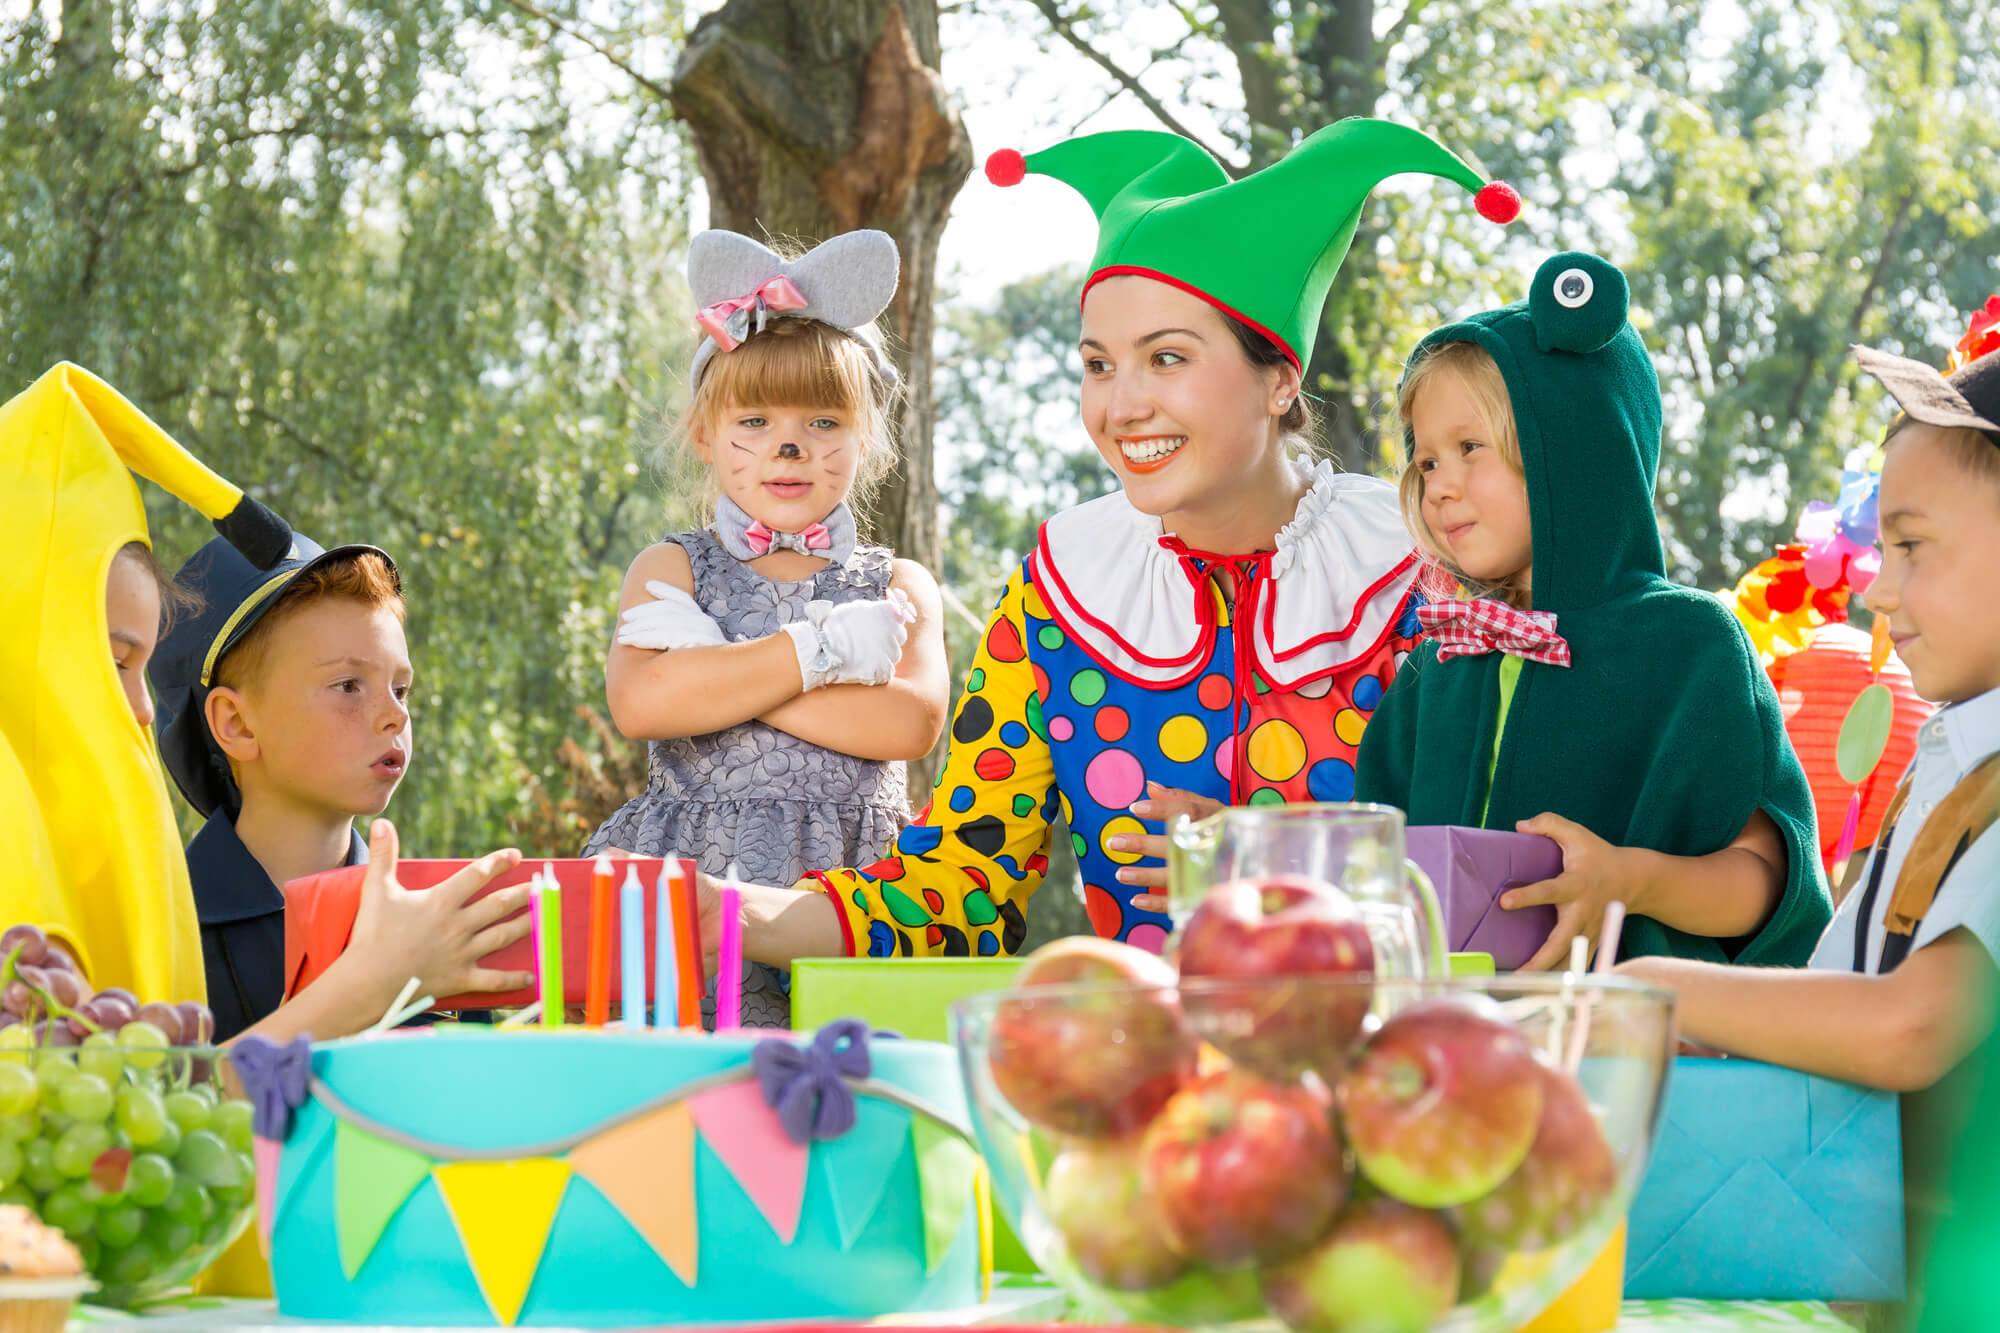 Birthday Party Activities For Kids
 5 Fall Birthday Party Activities Your Kids Will Love